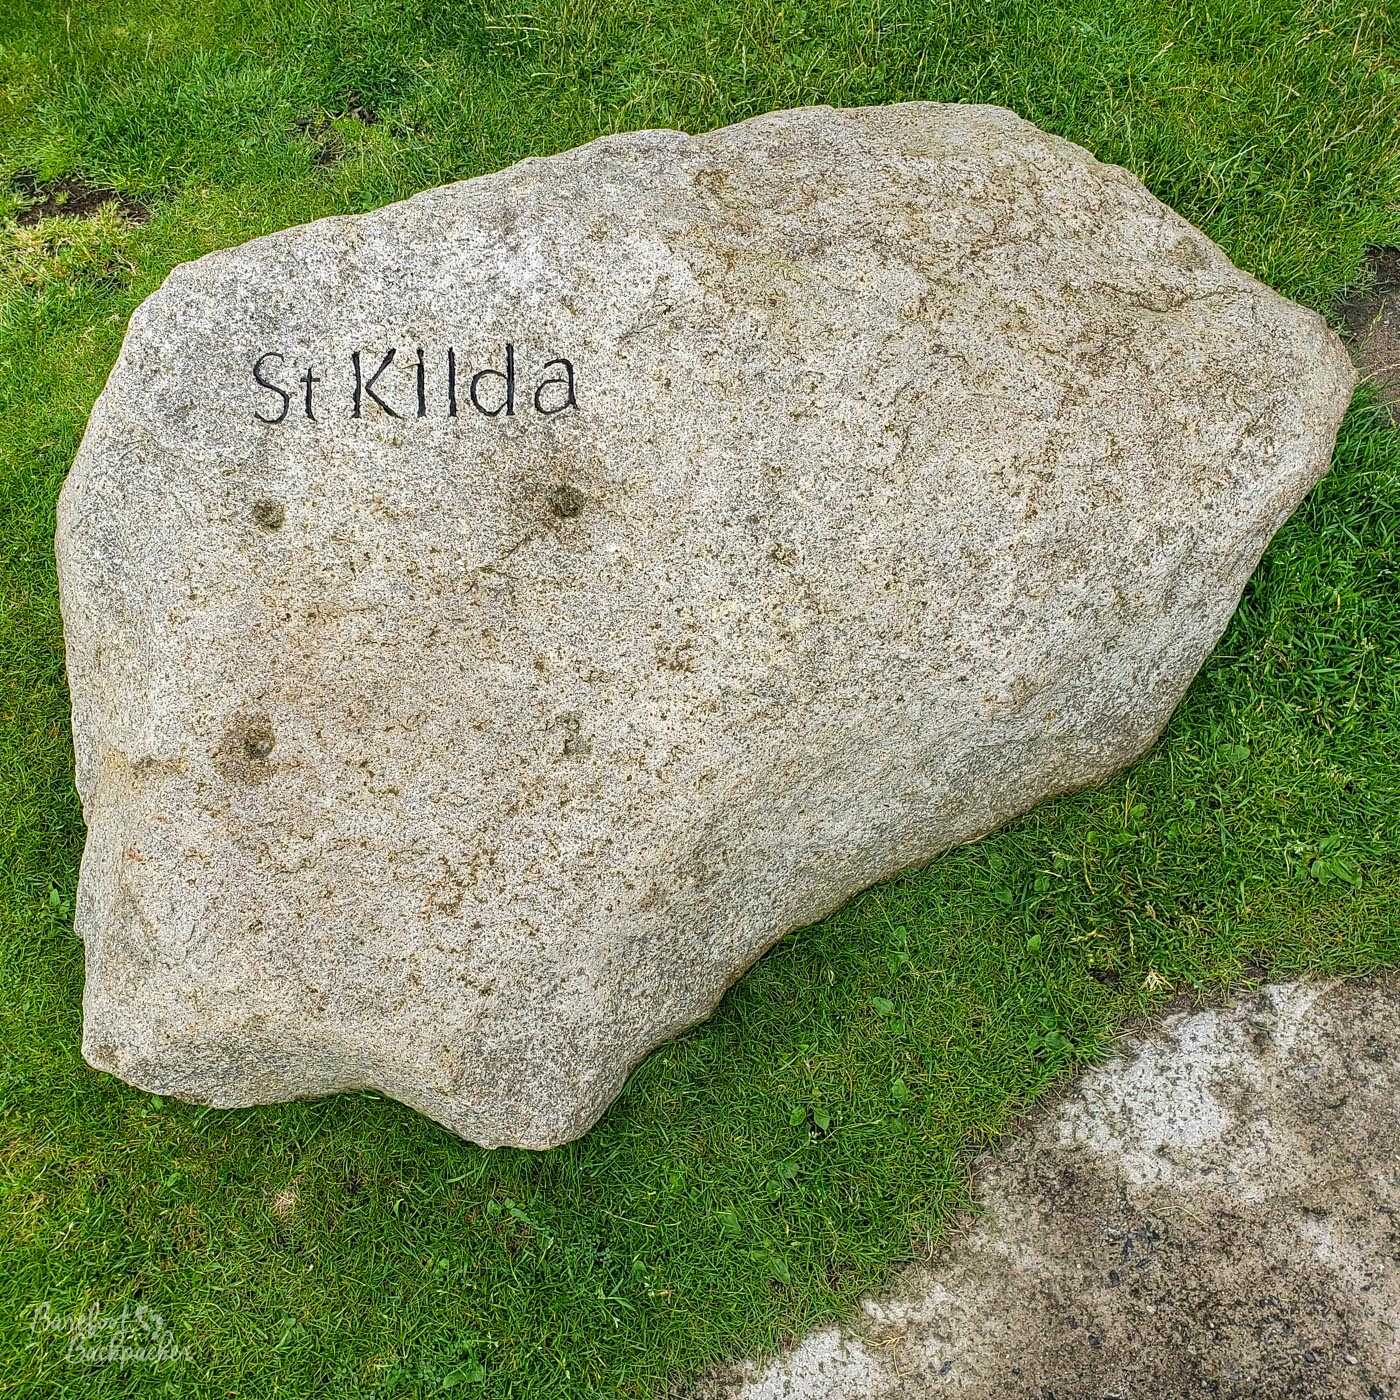 The St Kilda name on a rock in the grass, near the harbour at Hirta.